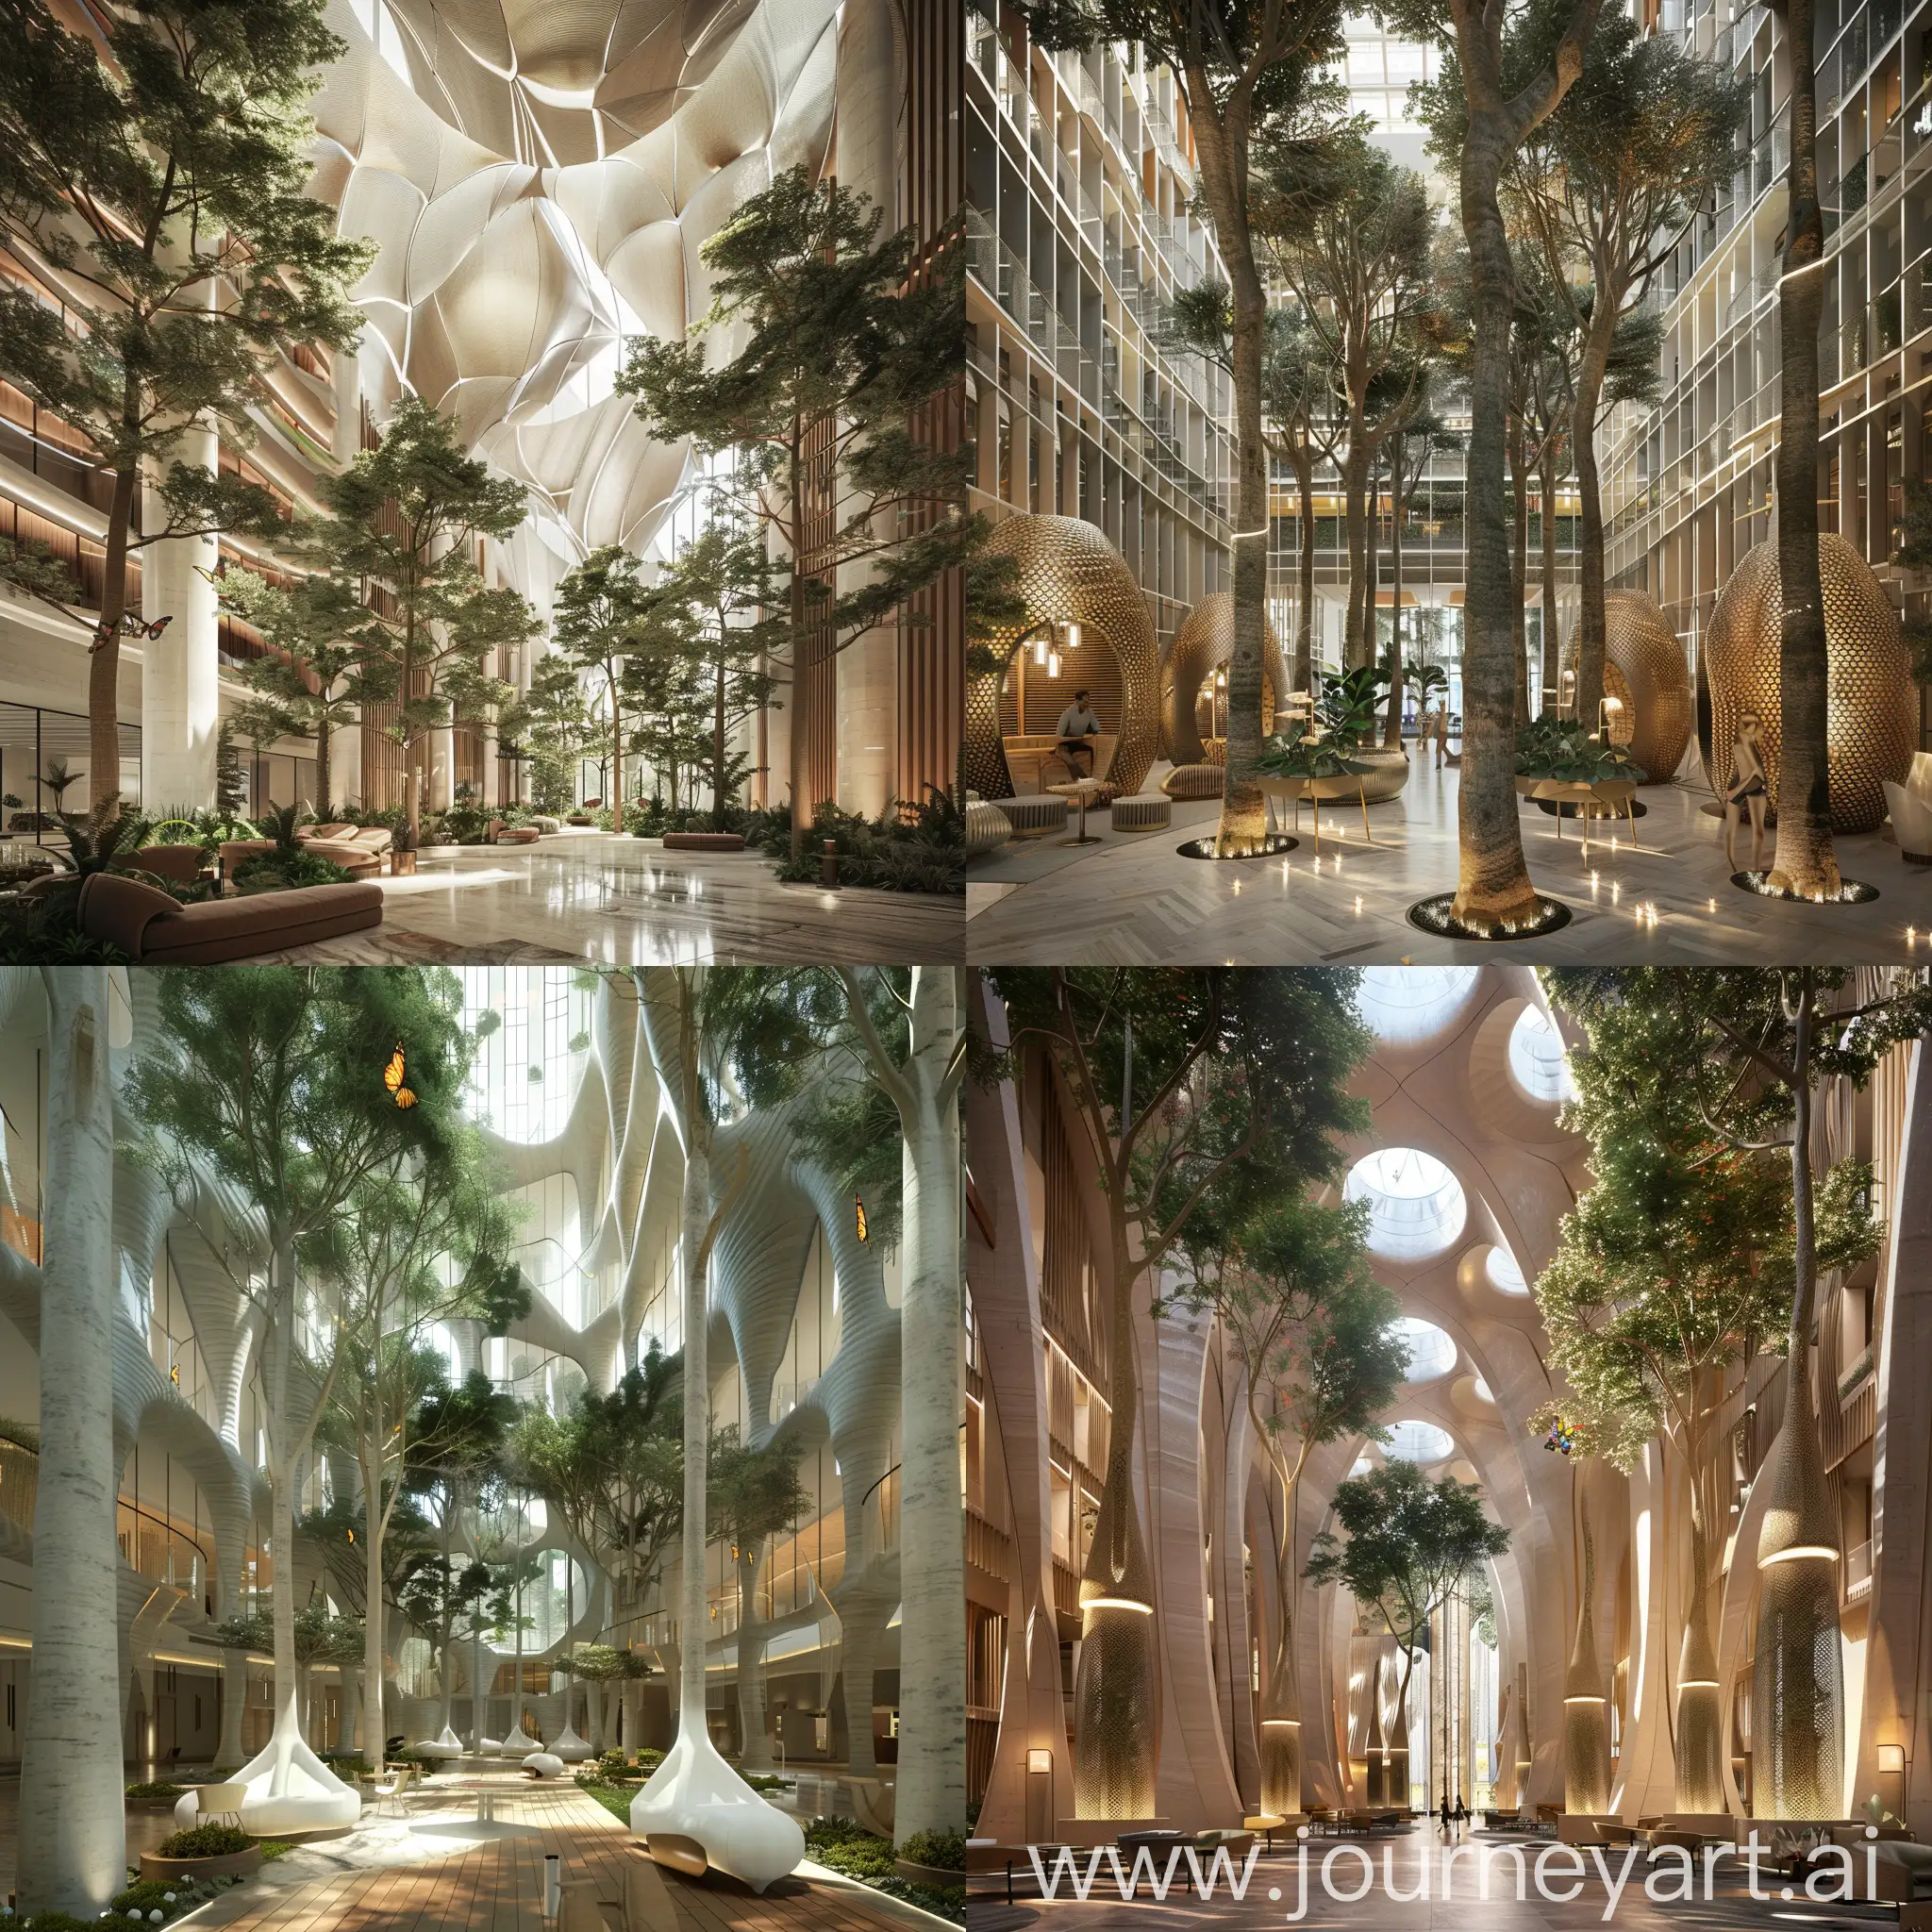 Luxurious-Hotel-Communal-Space-with-Tall-Tree-CocoonInspired-Design